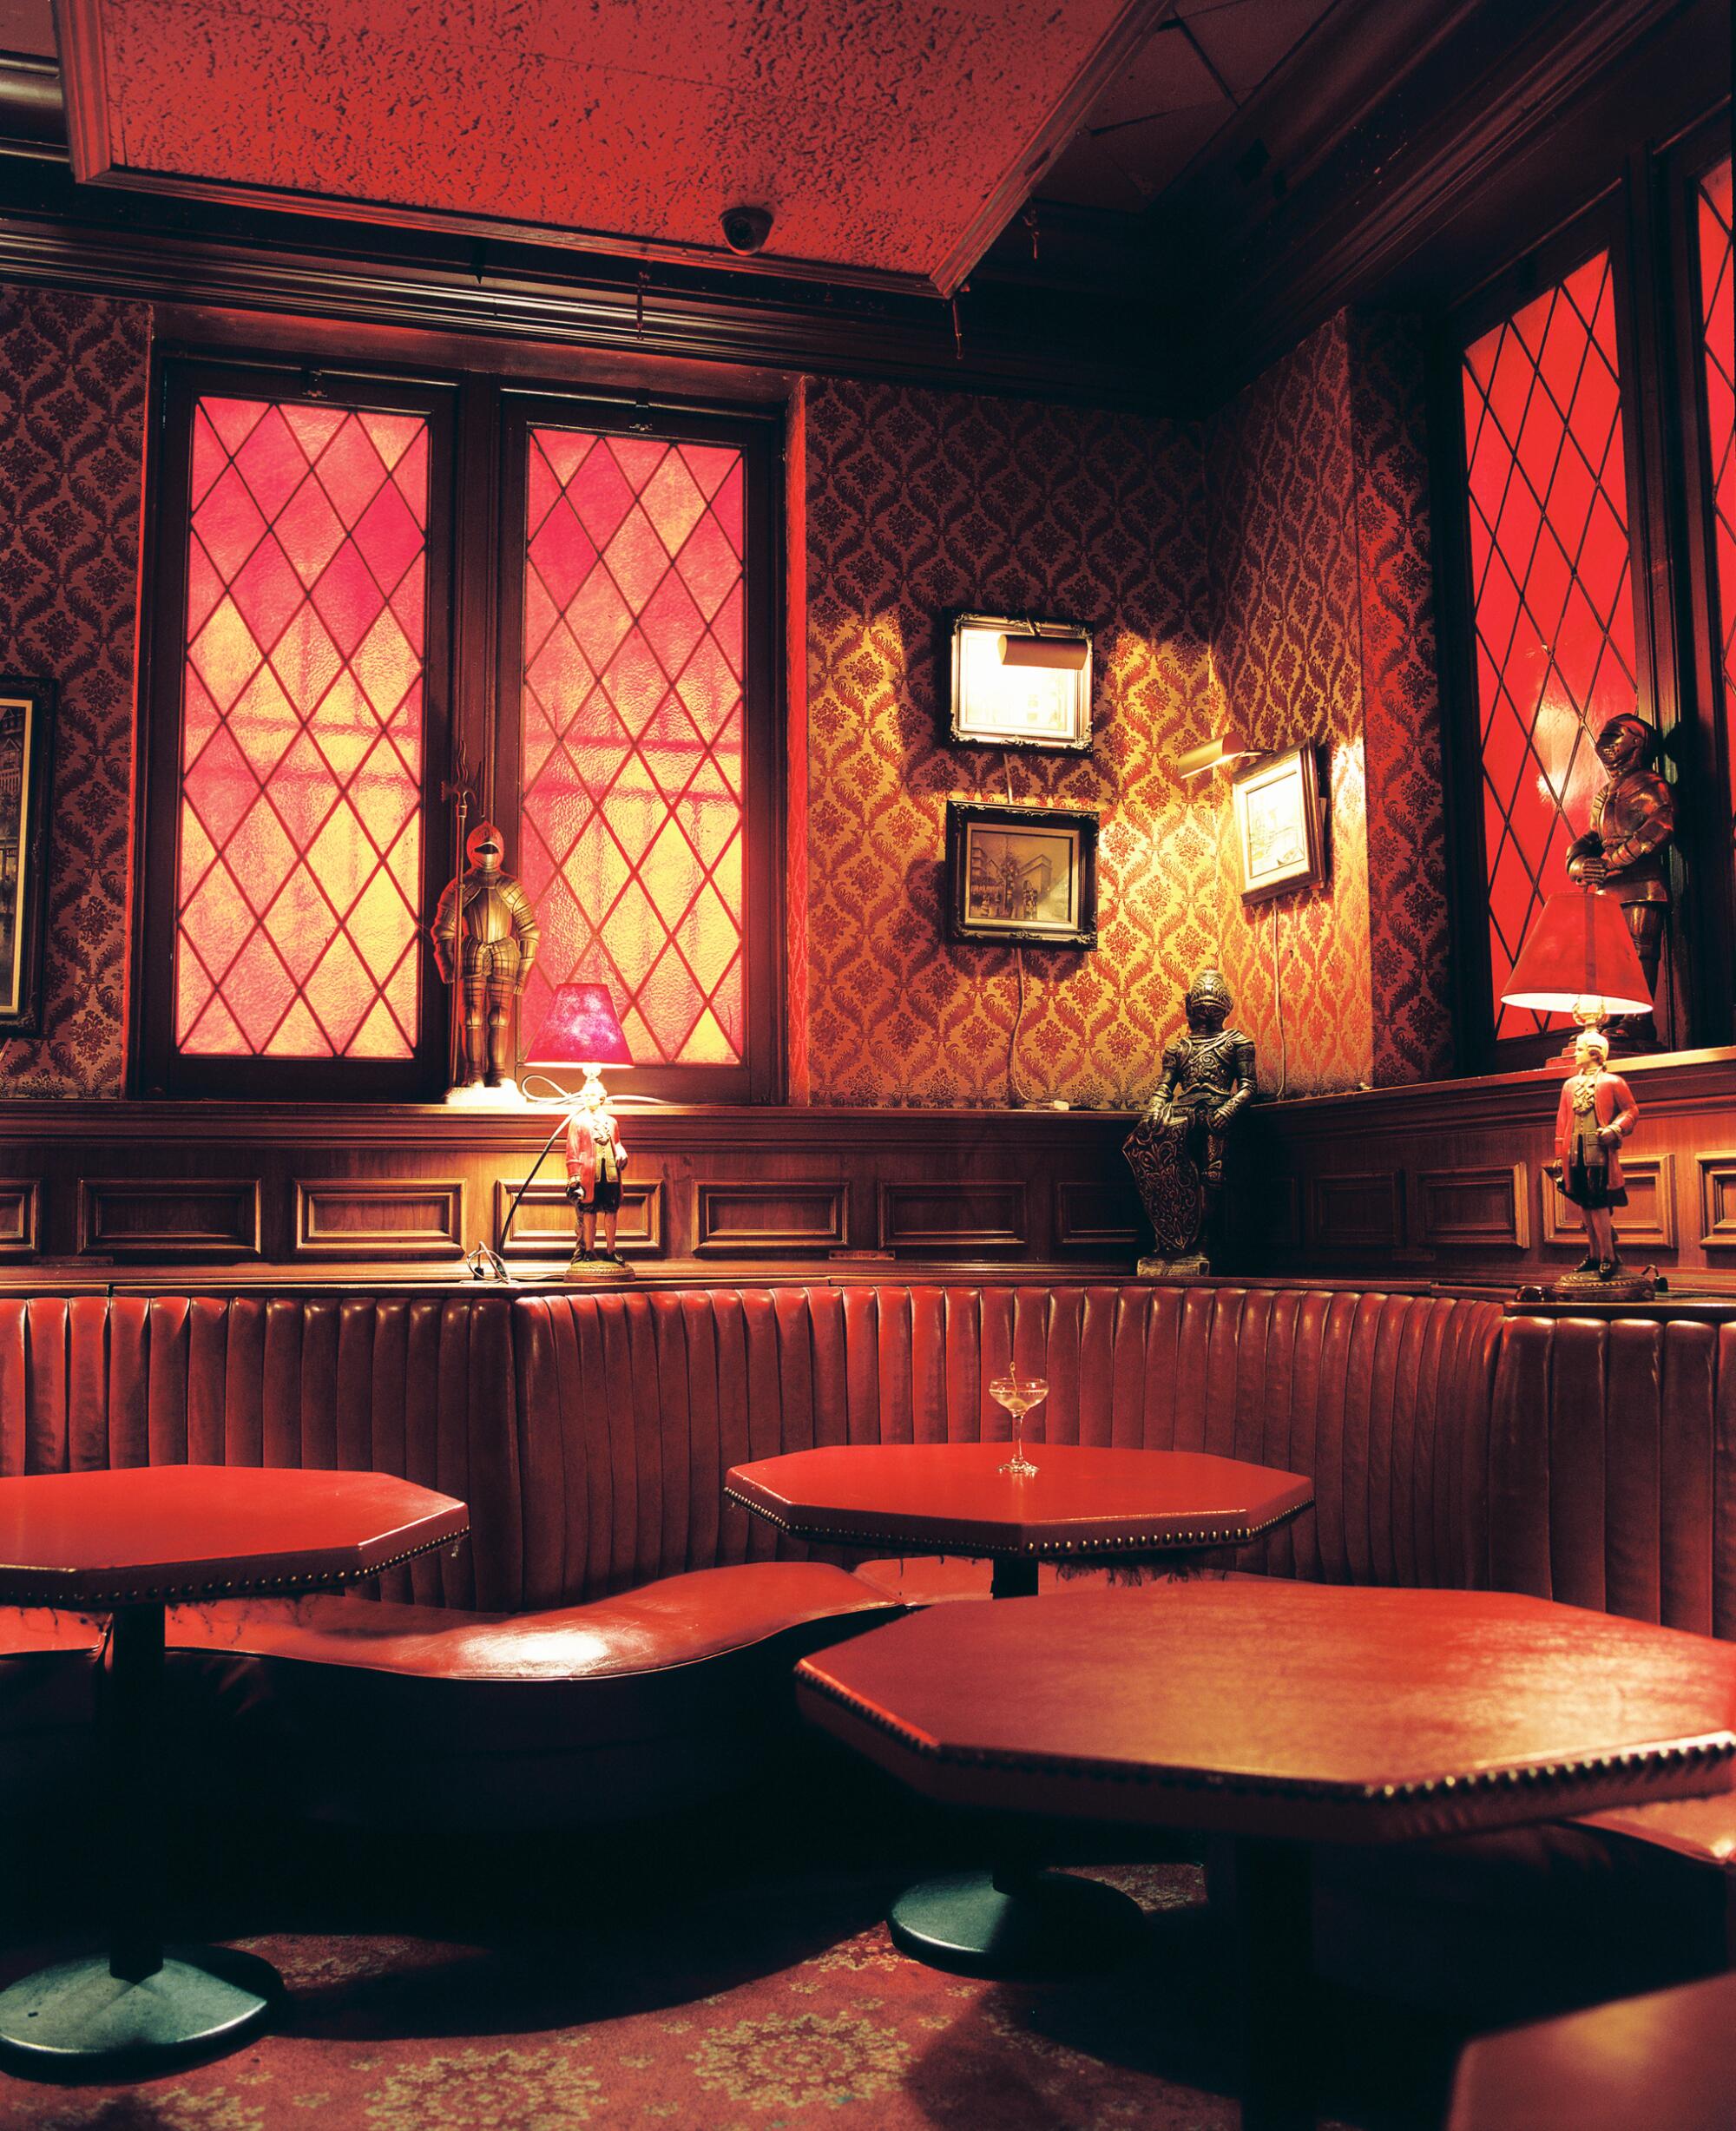 A photo of empty restaurant booths bathed in a red light.